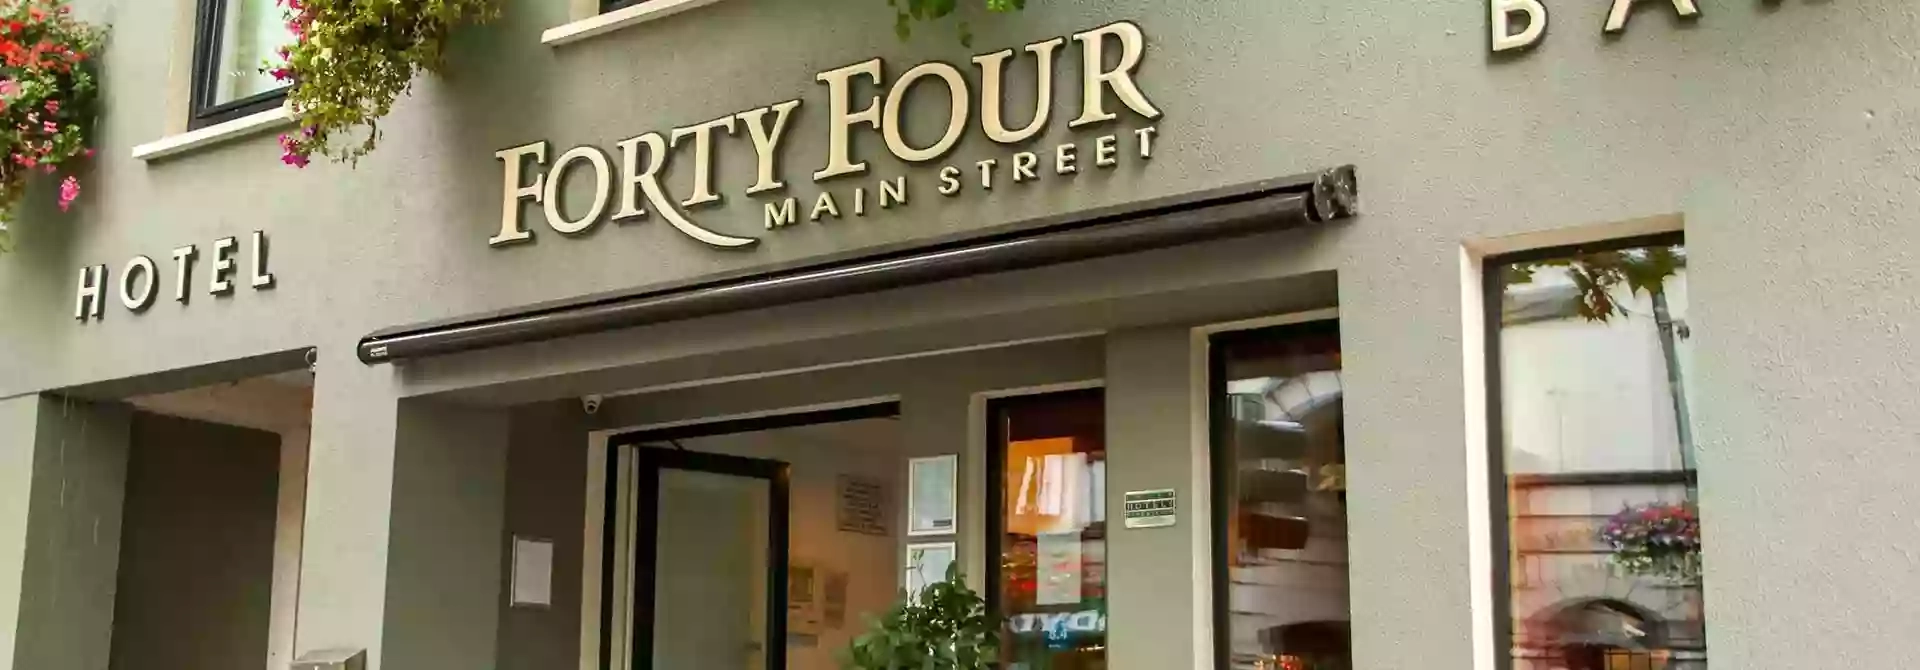 Forty Four Main Street